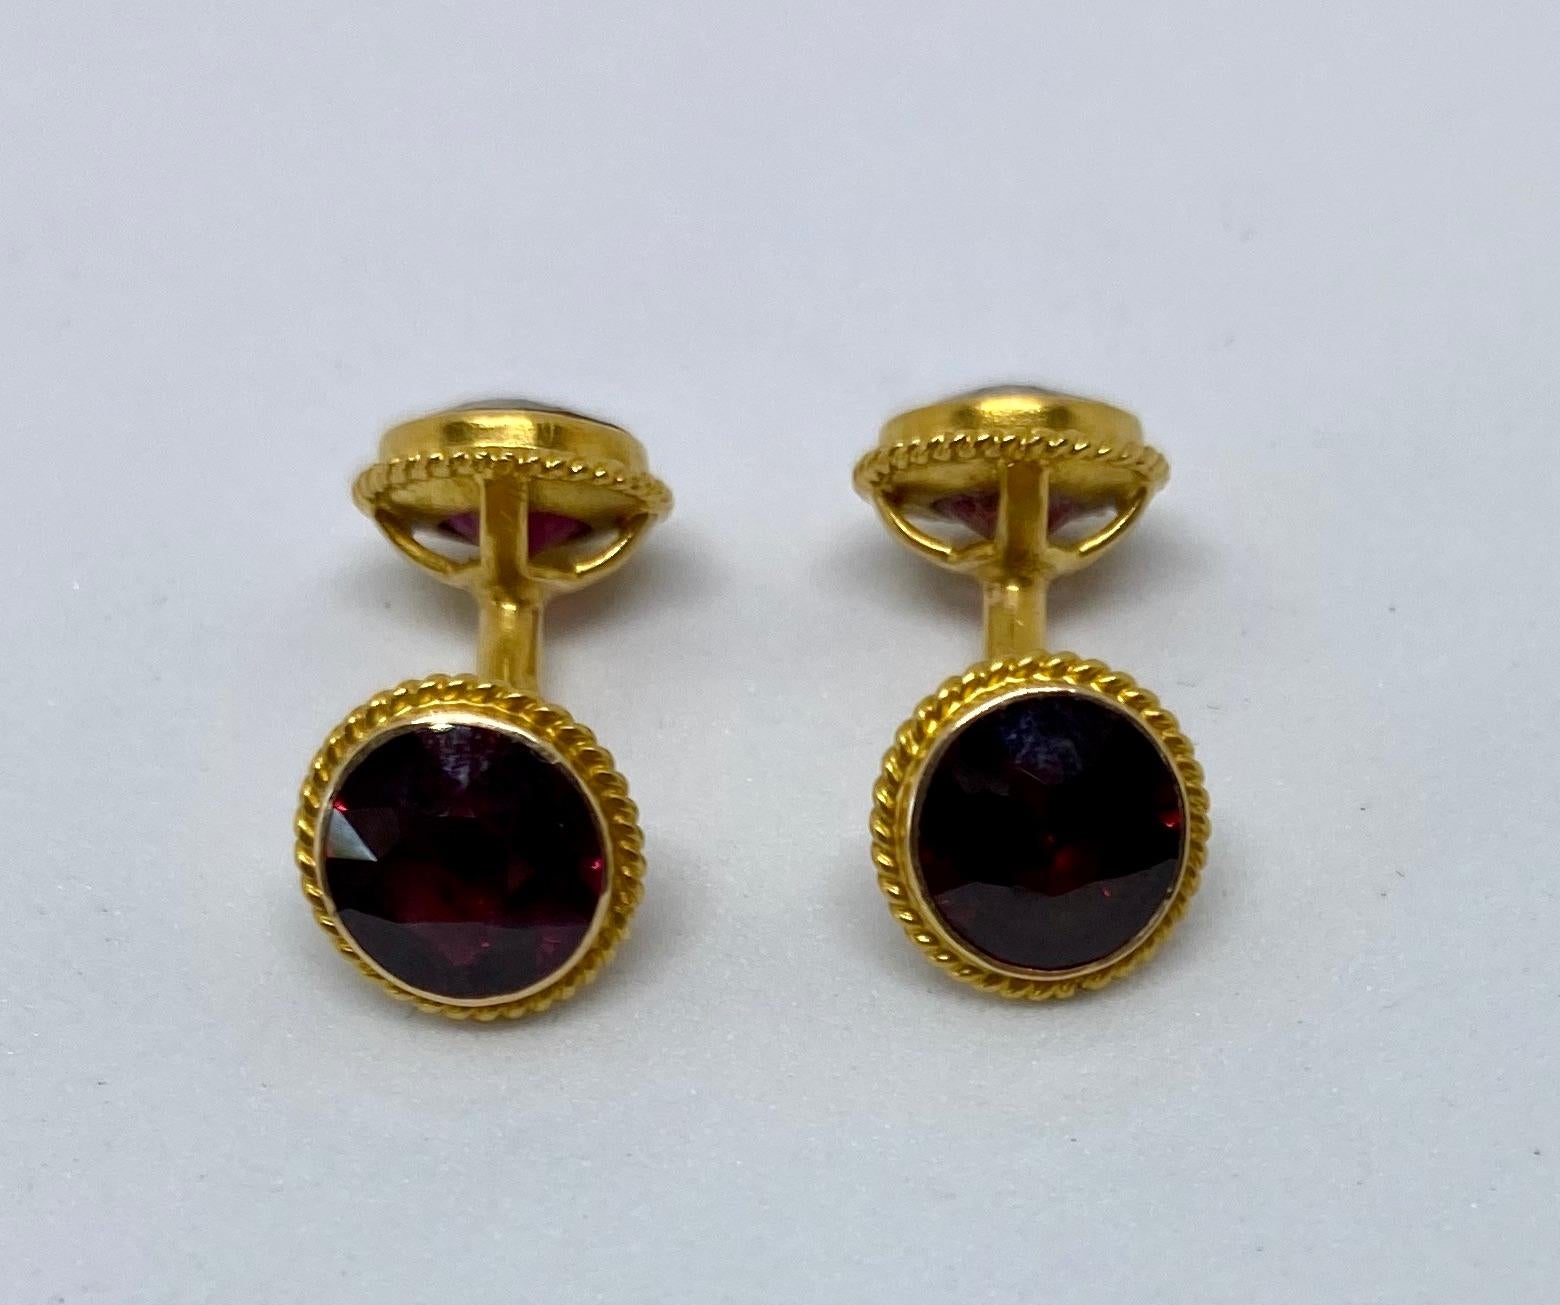 Women's or Men's Antique Double-Sided Cufflinks with Faceted Garnets Set in 14 Karat Yellow Gold